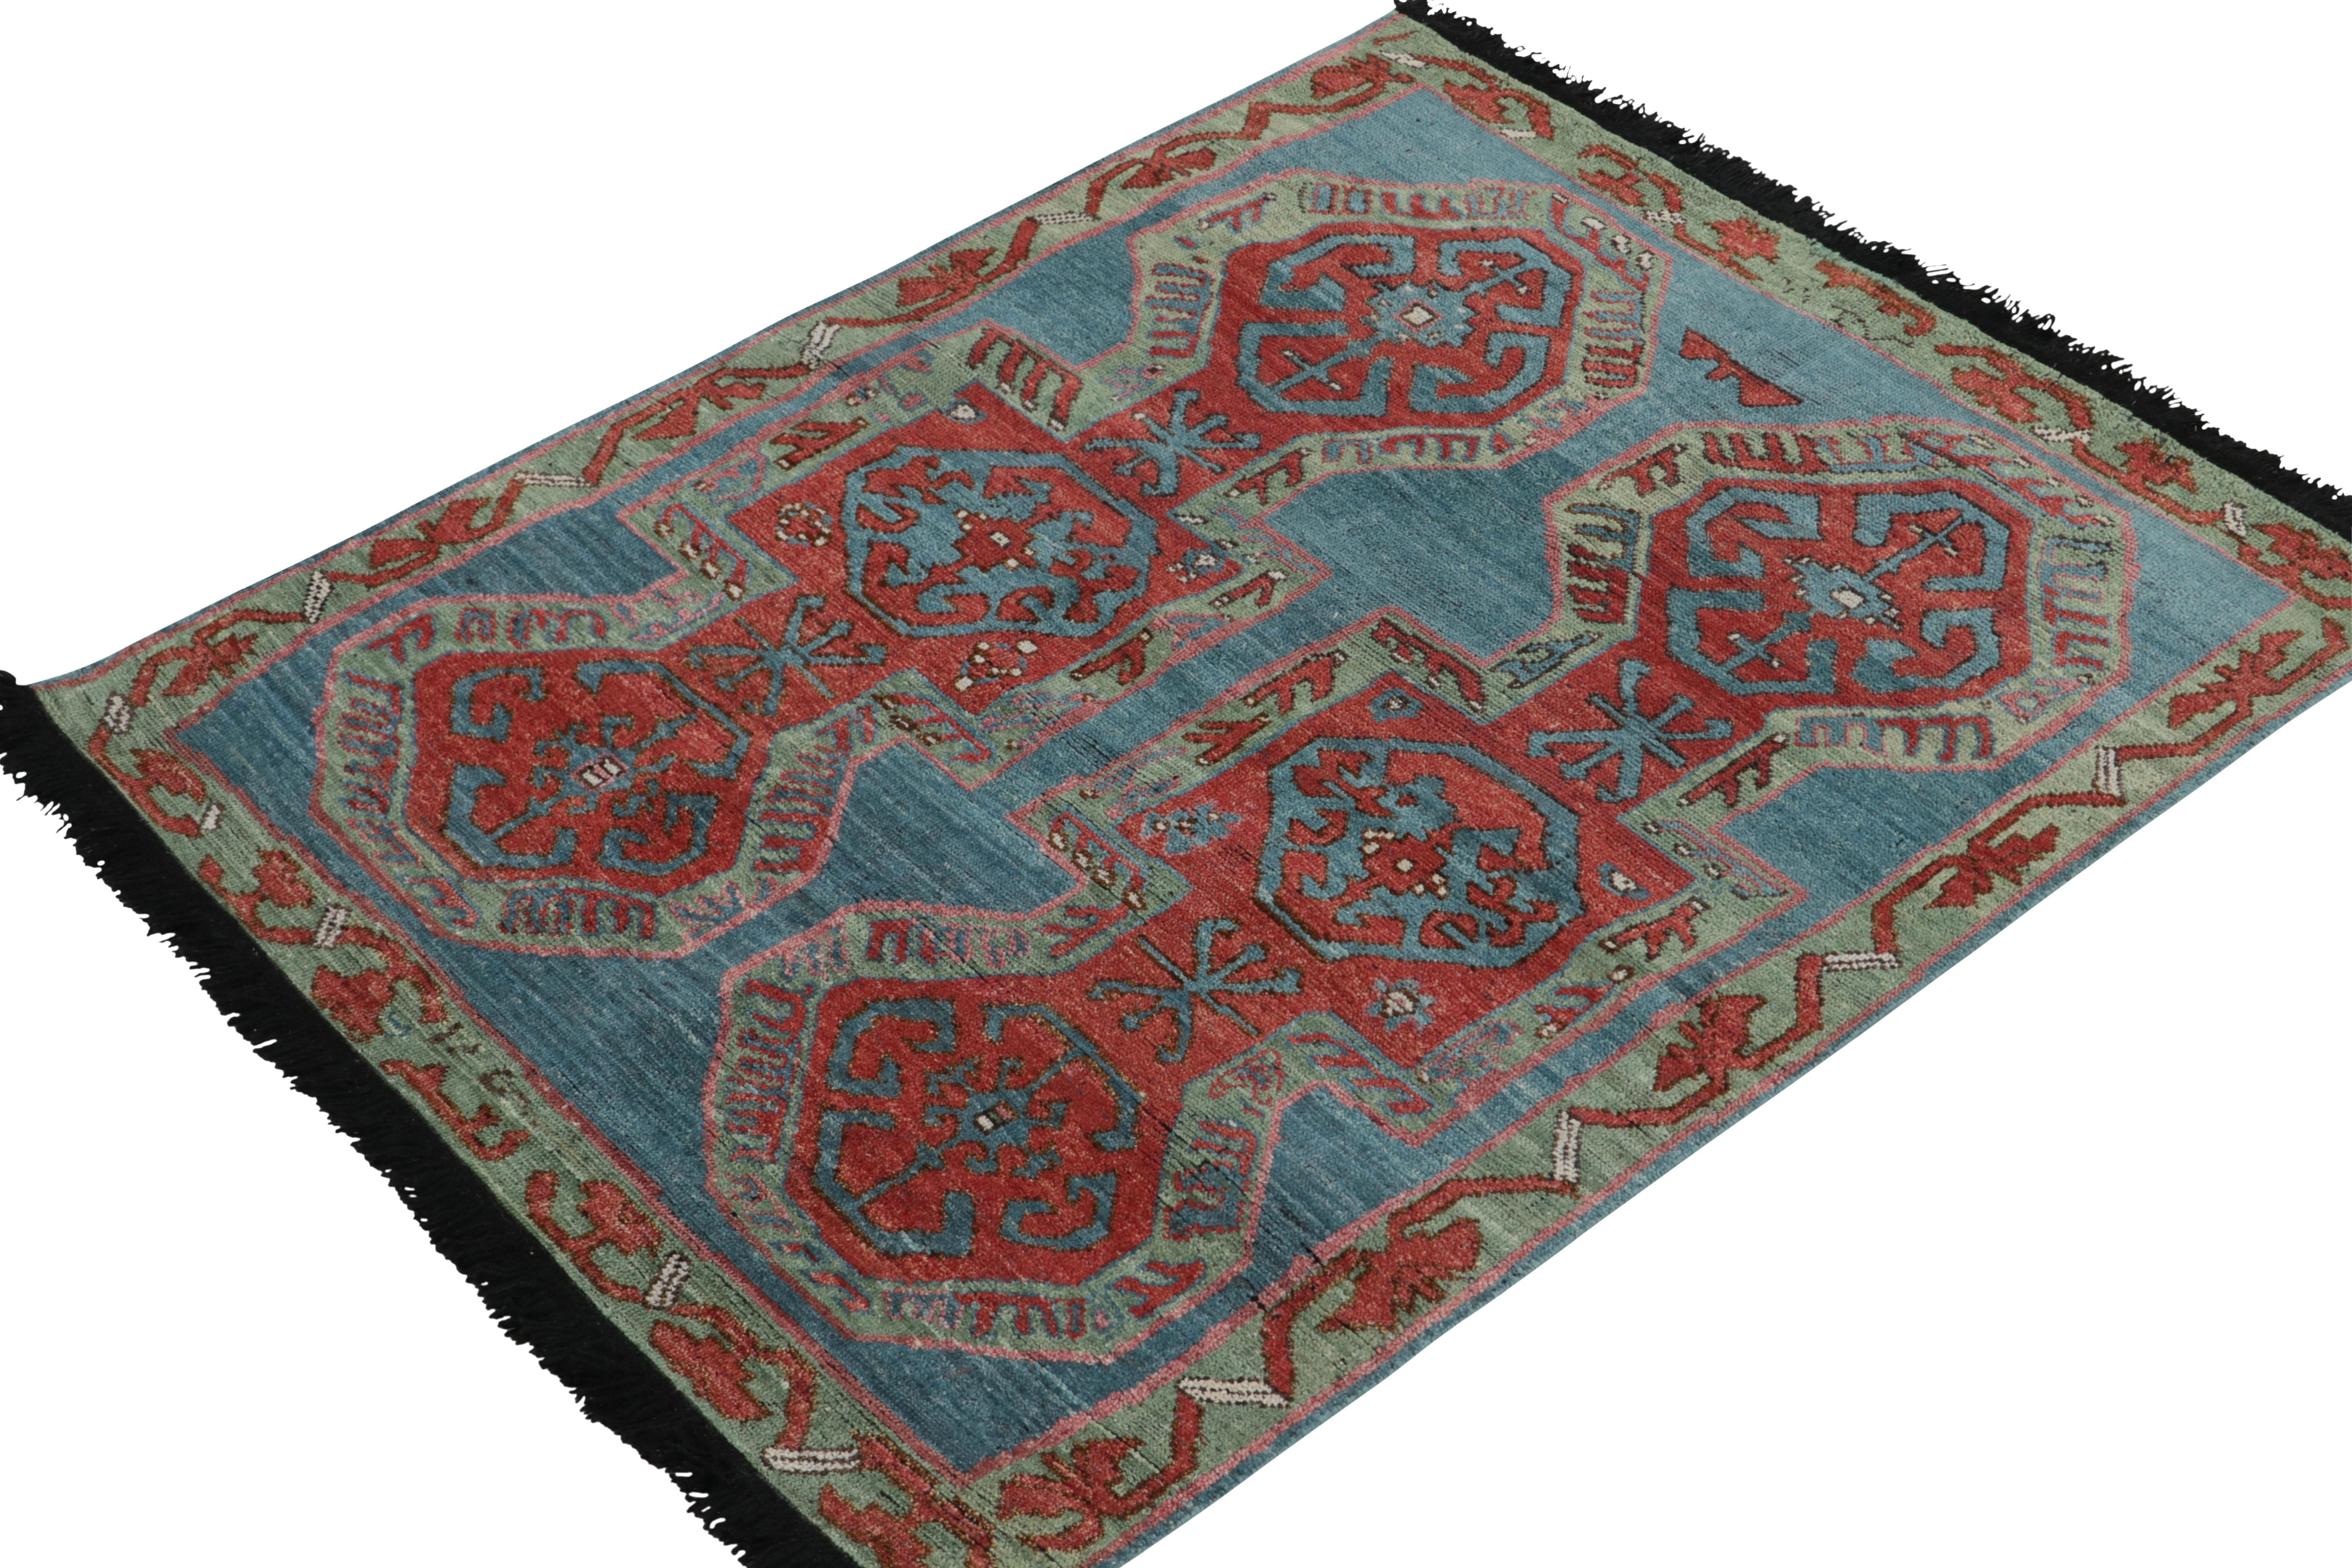 Indian Rug & Kilim's Tribal Style rug in Red, Blue, Green Geometric Pattern For Sale